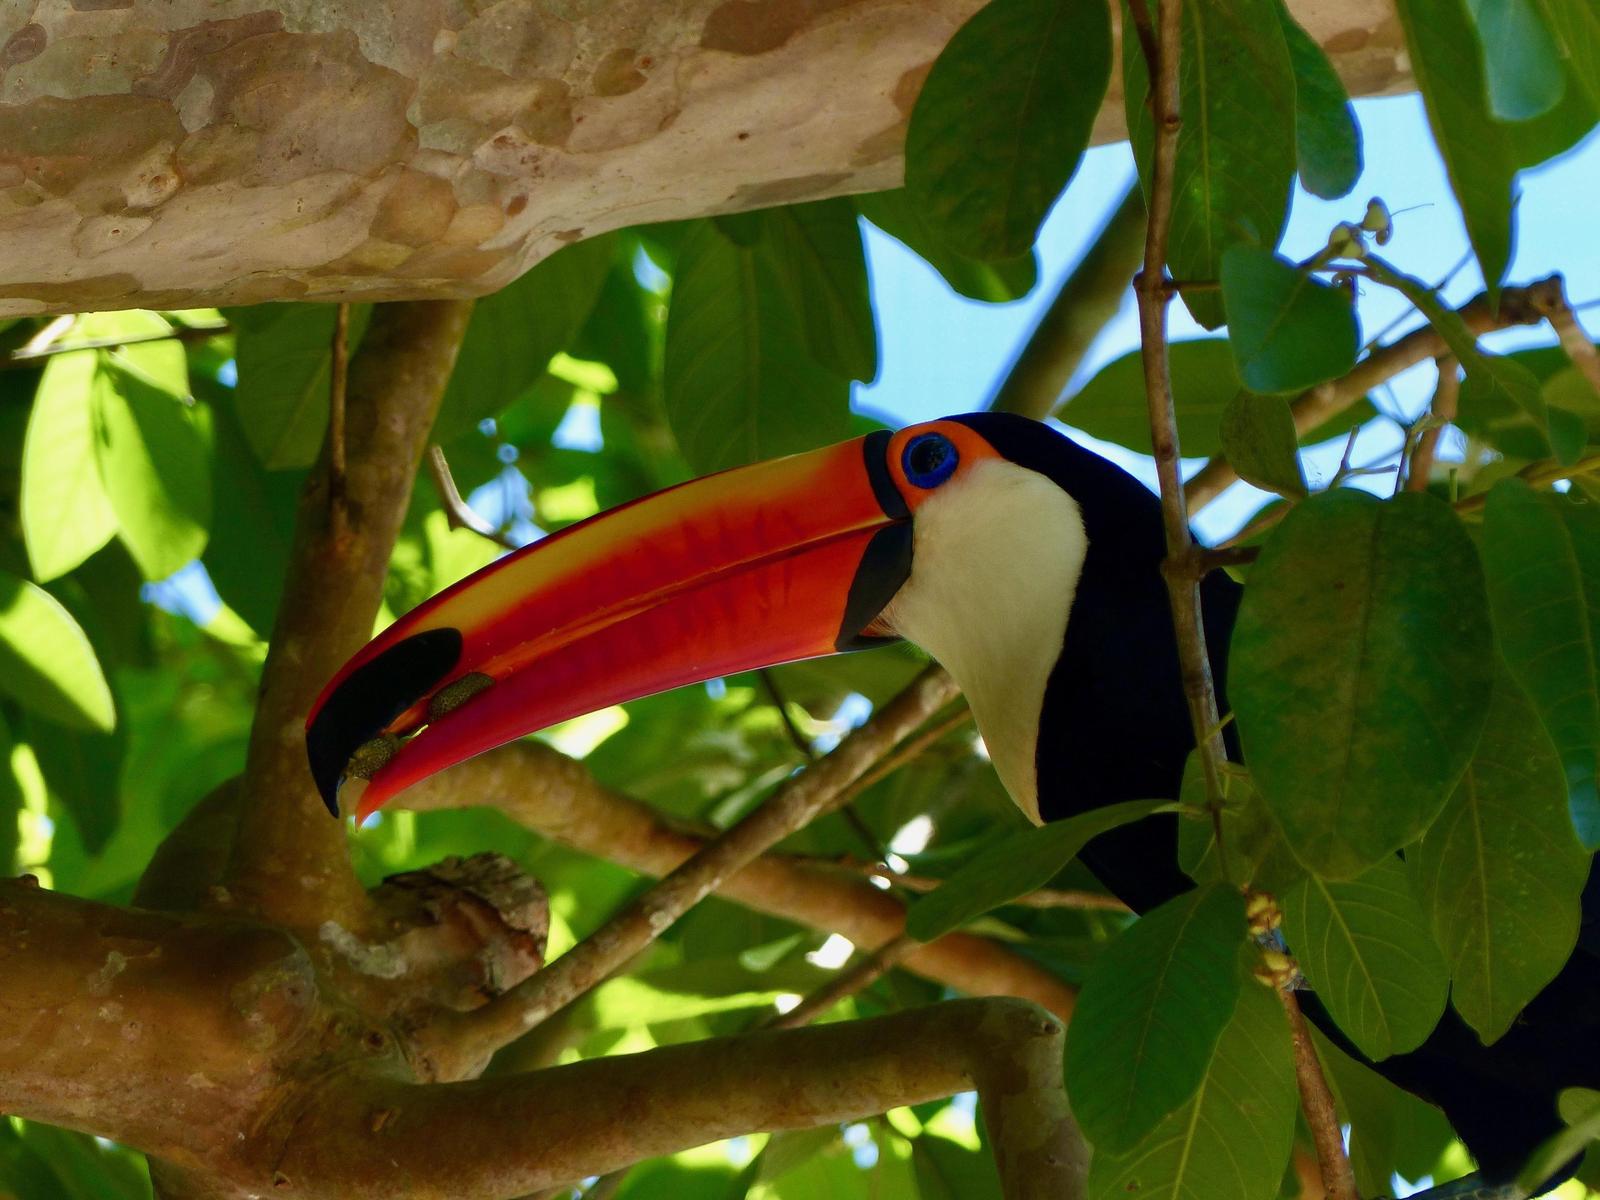 Toco Toucan Photo by STEPHANIE CALKINS